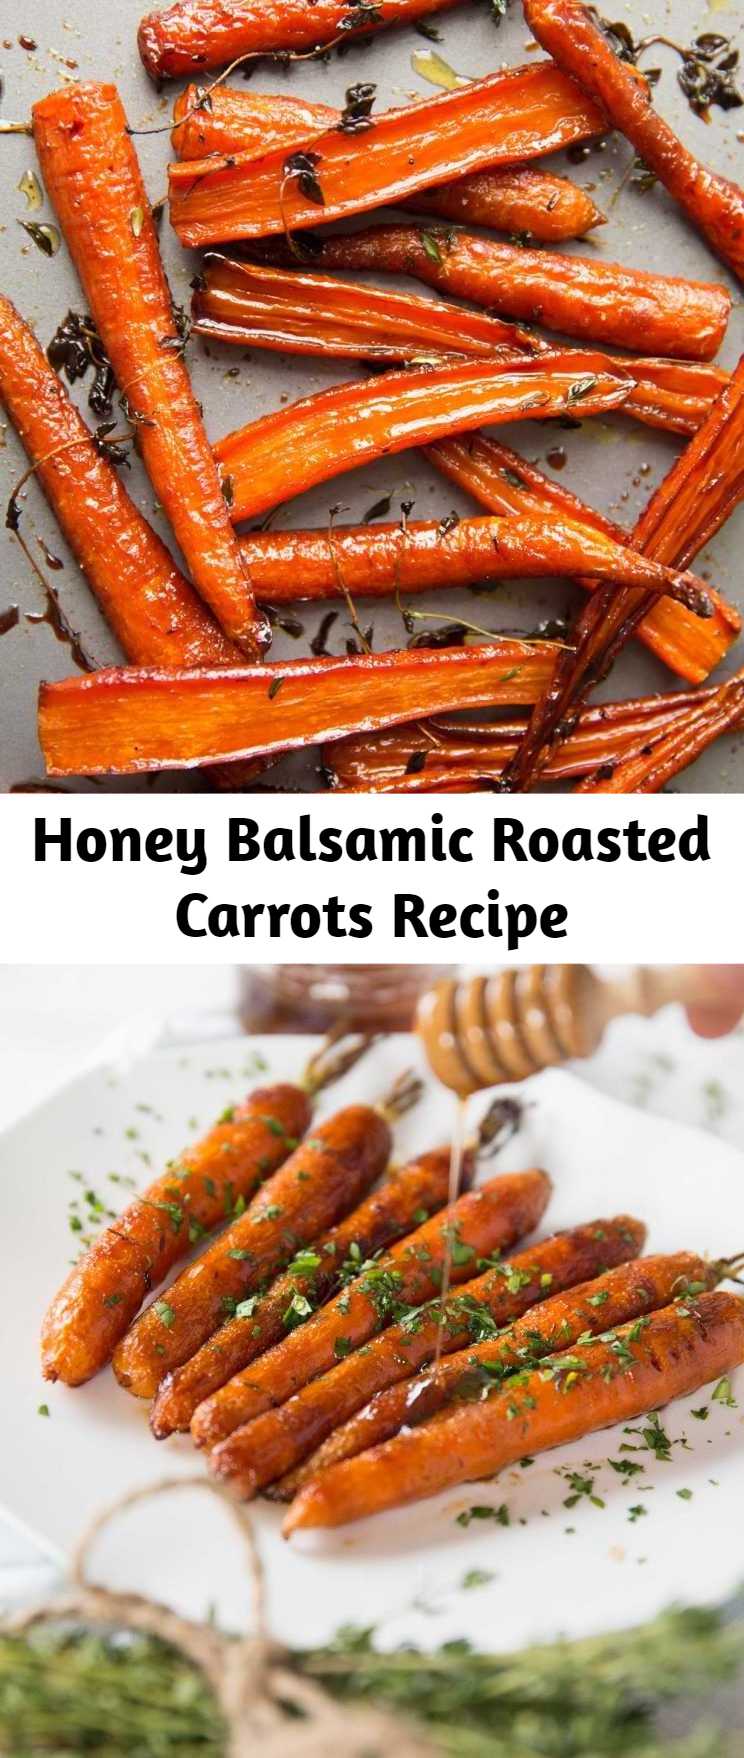 Honey Balsamic Roasted Carrots Recipe - These Honey Balsamic Roasted Carrots are beautifully caramelized in a sweet and sticky glaze. The perfect side dish for your Sunday roast!